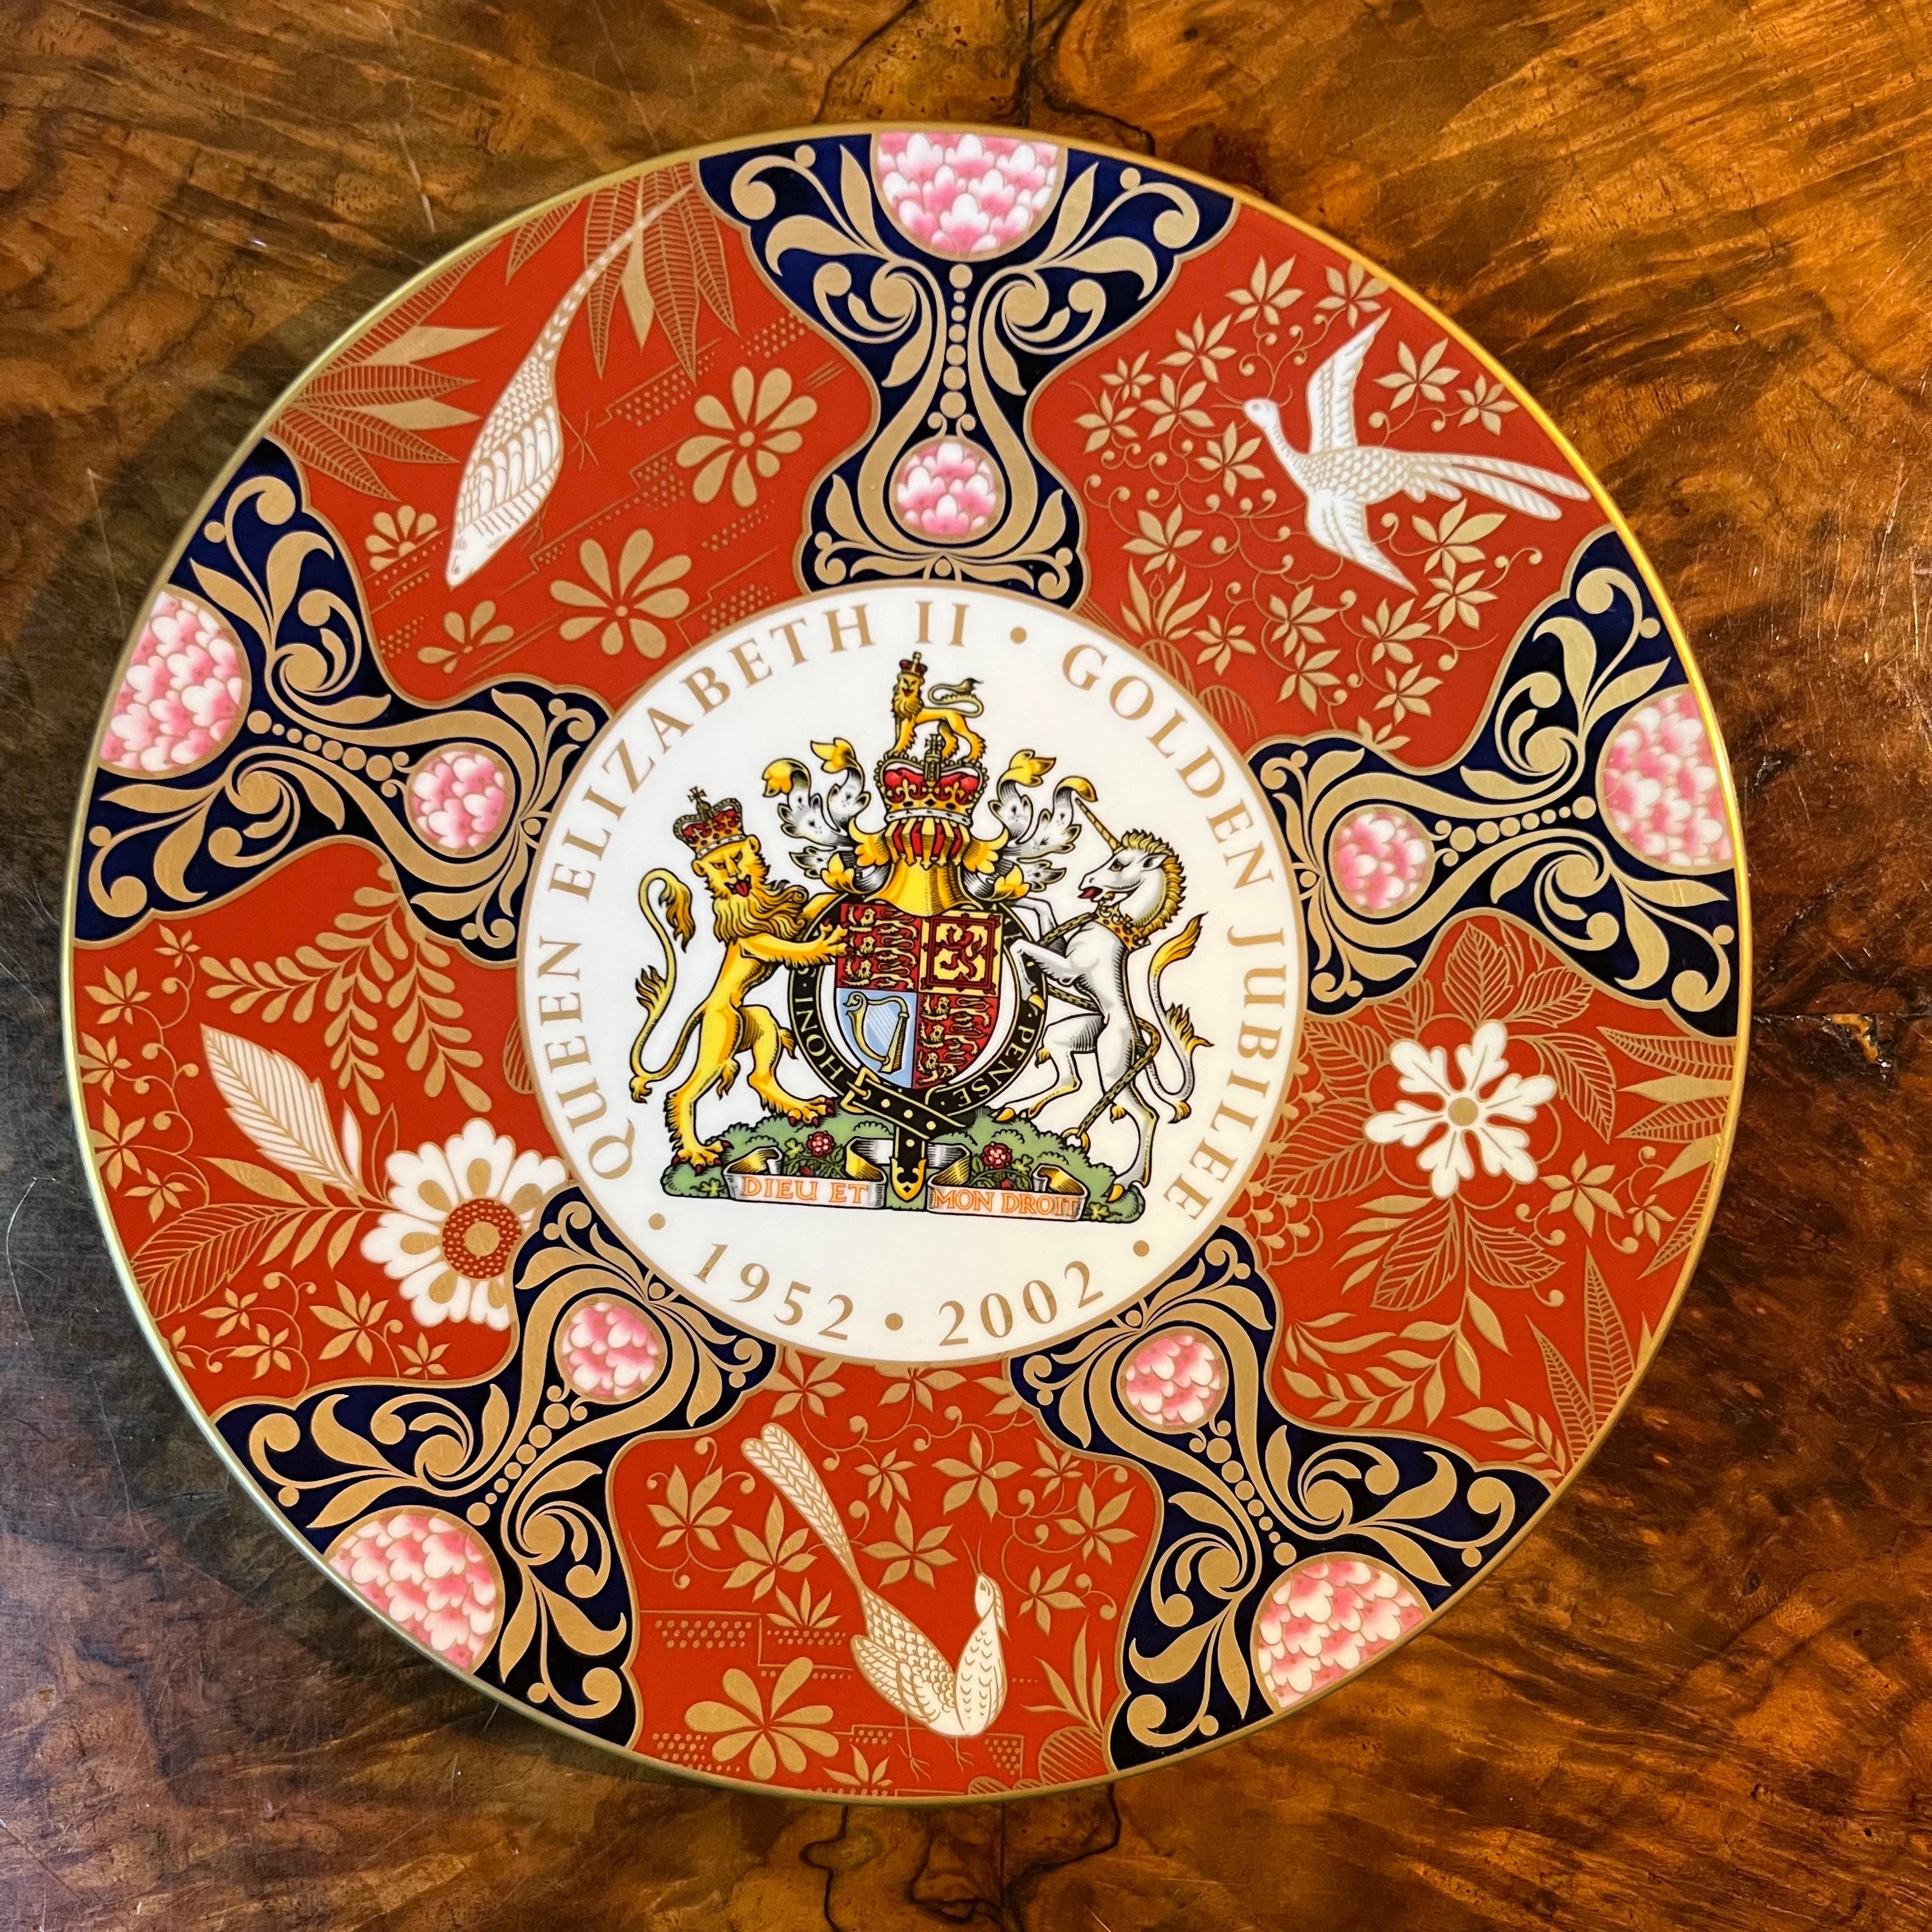 Queen Elizabeth II Golden Jubilee Plate 1952-2002

Material: Porcelain 

Country Of Origin: England 

Measurements: 1.5cm high, 20cm diameter 

Postage via Australia Post with tracking available